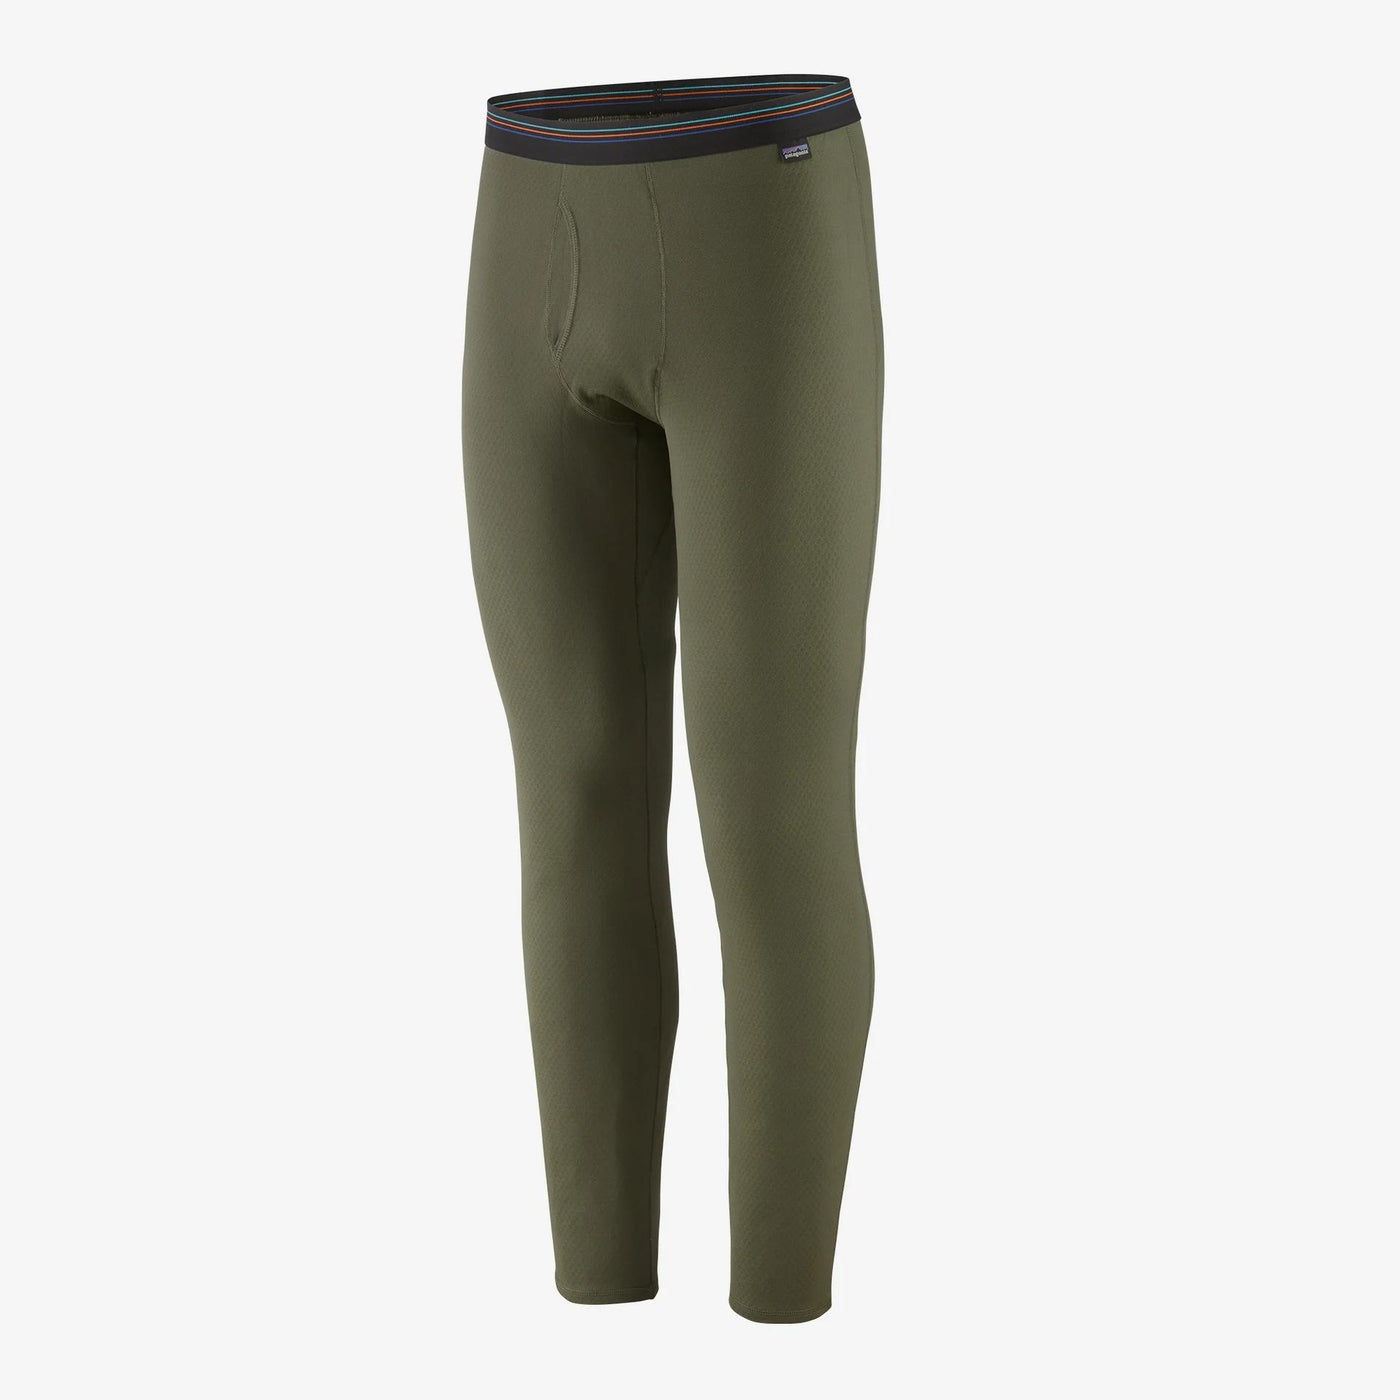 Patagonia Men's Capilene Midweight Bottoms-Men's Accessories-Basin Green-S-Kevin's Fine Outdoor Gear & Apparel